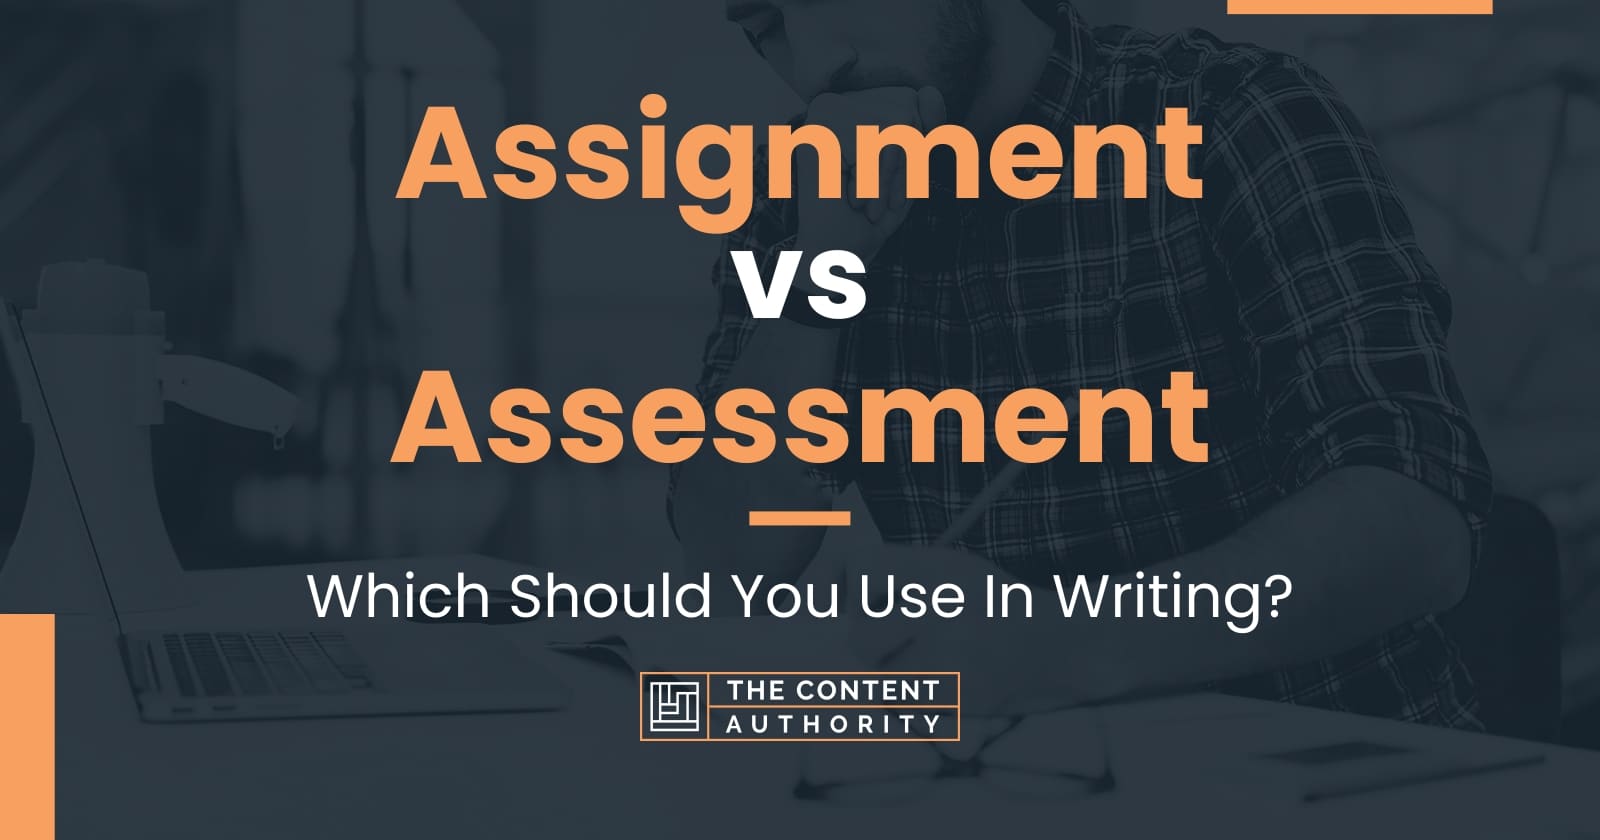 difference between assignment and assessment